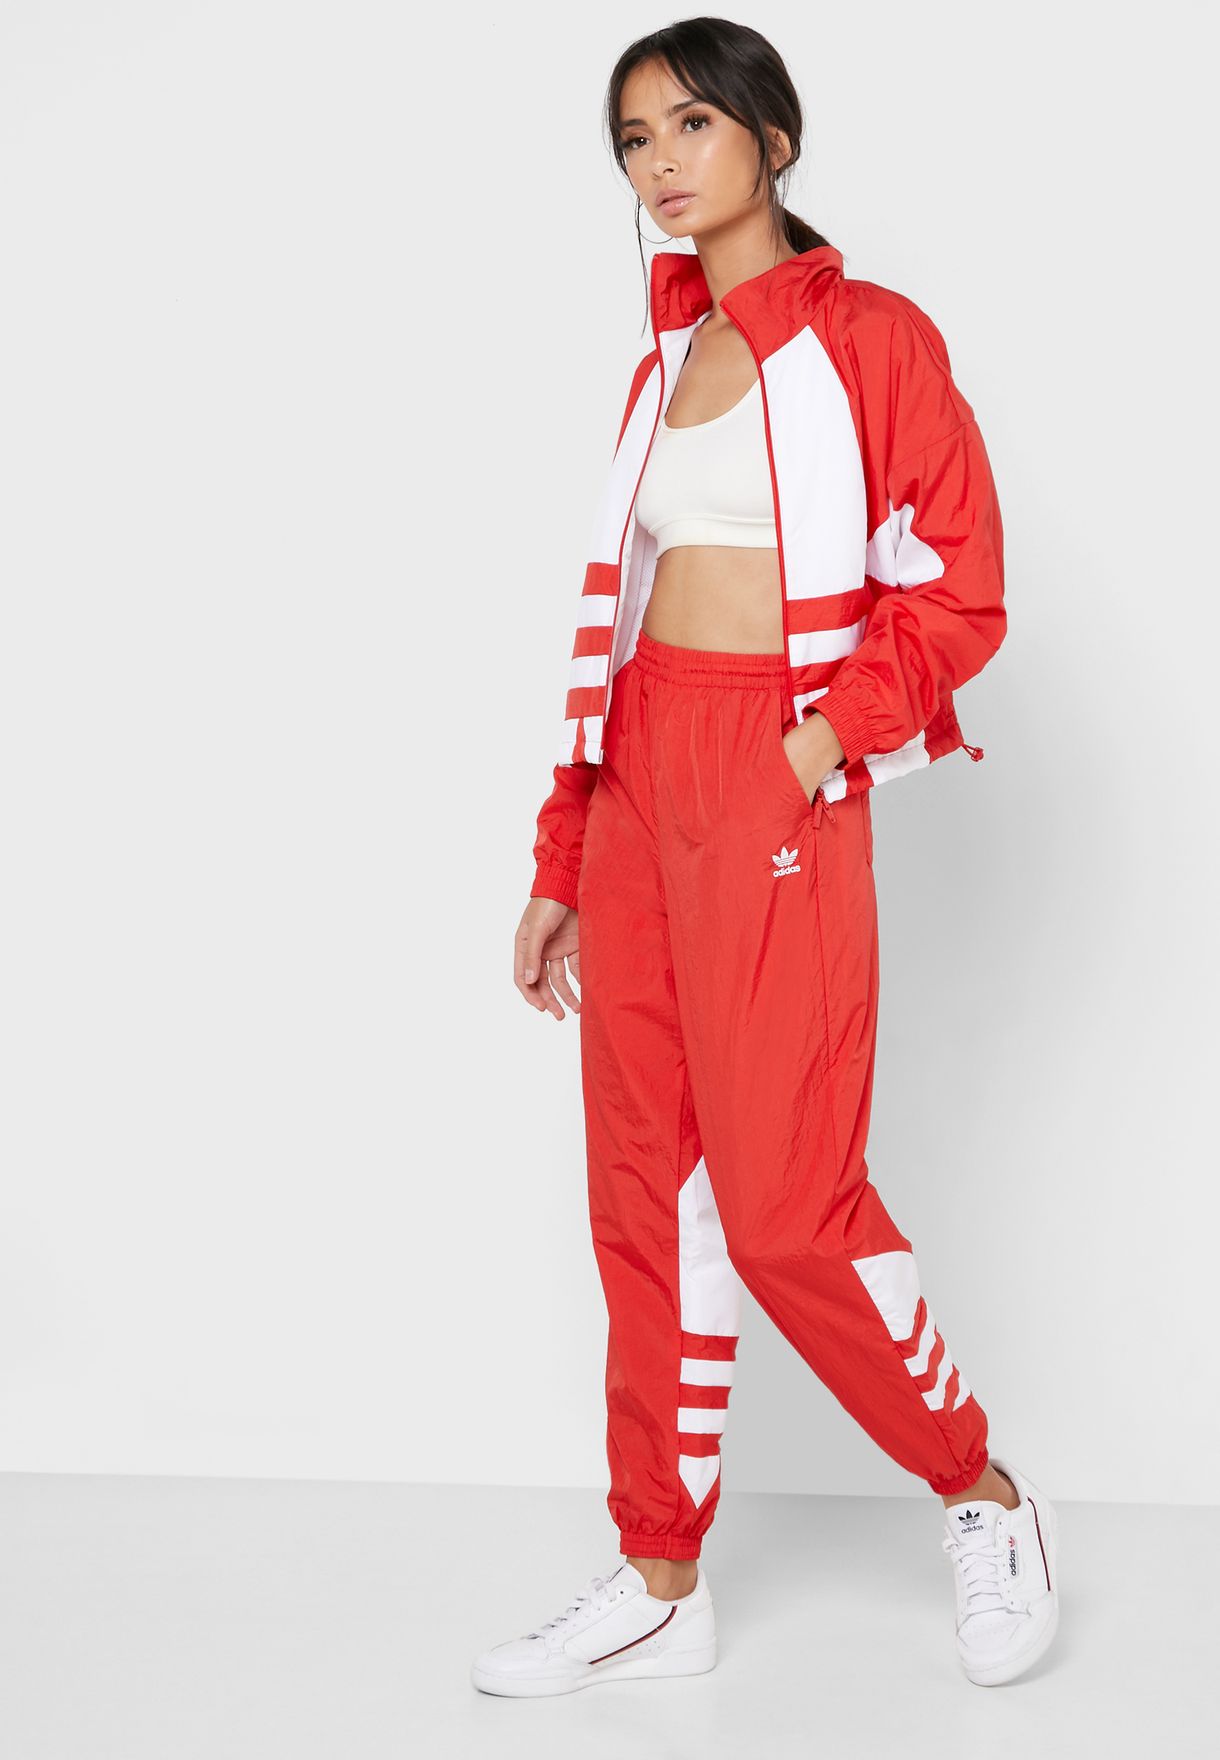 adidas track pants women red